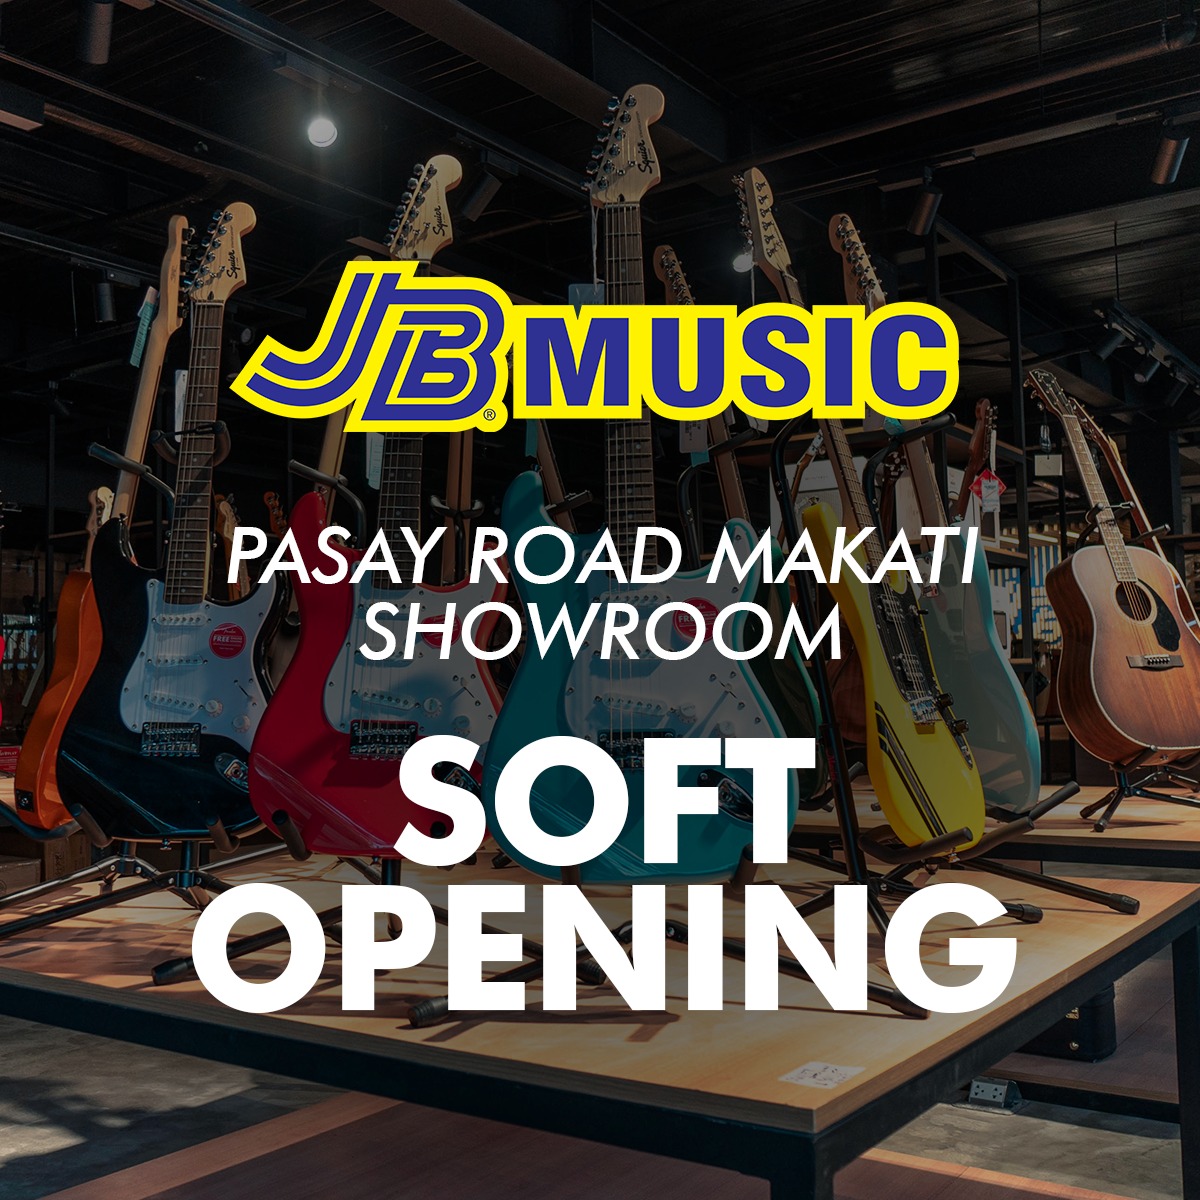 NEW BRANCH! JB Music & Sports Pasay Road Showroom